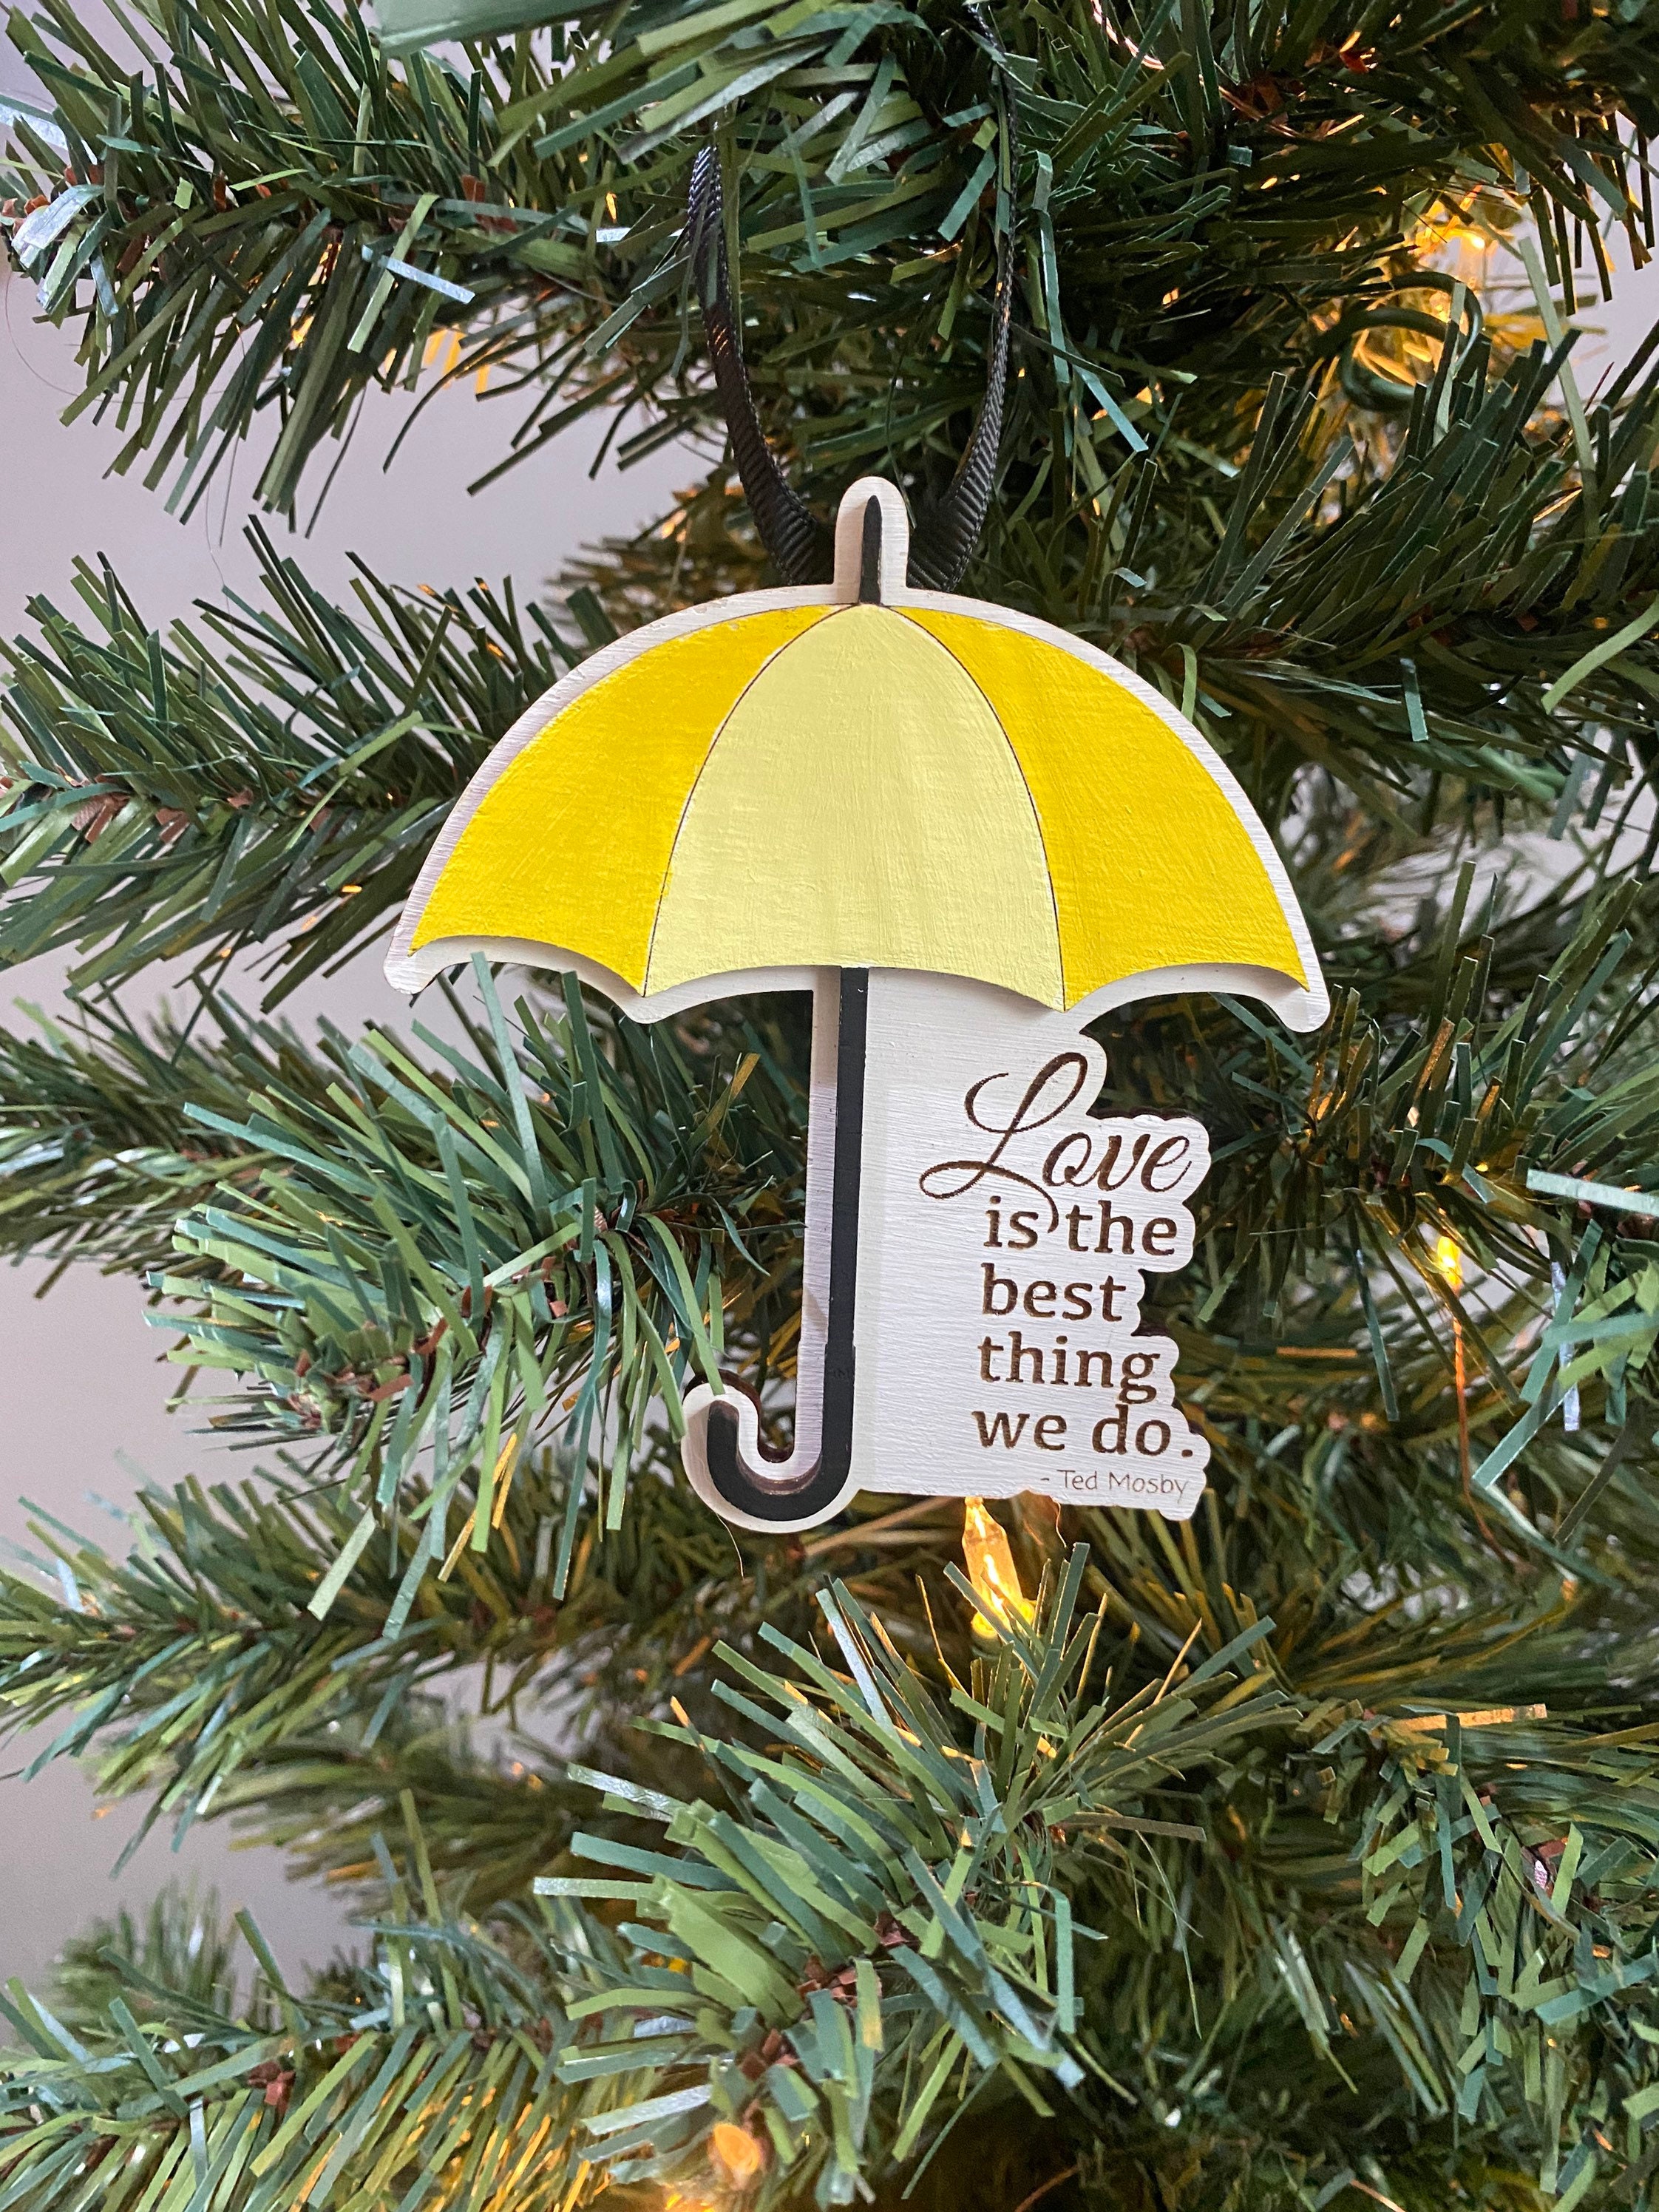 Love is the best thing we do Ornament Yellow Umbrella foto Immagine